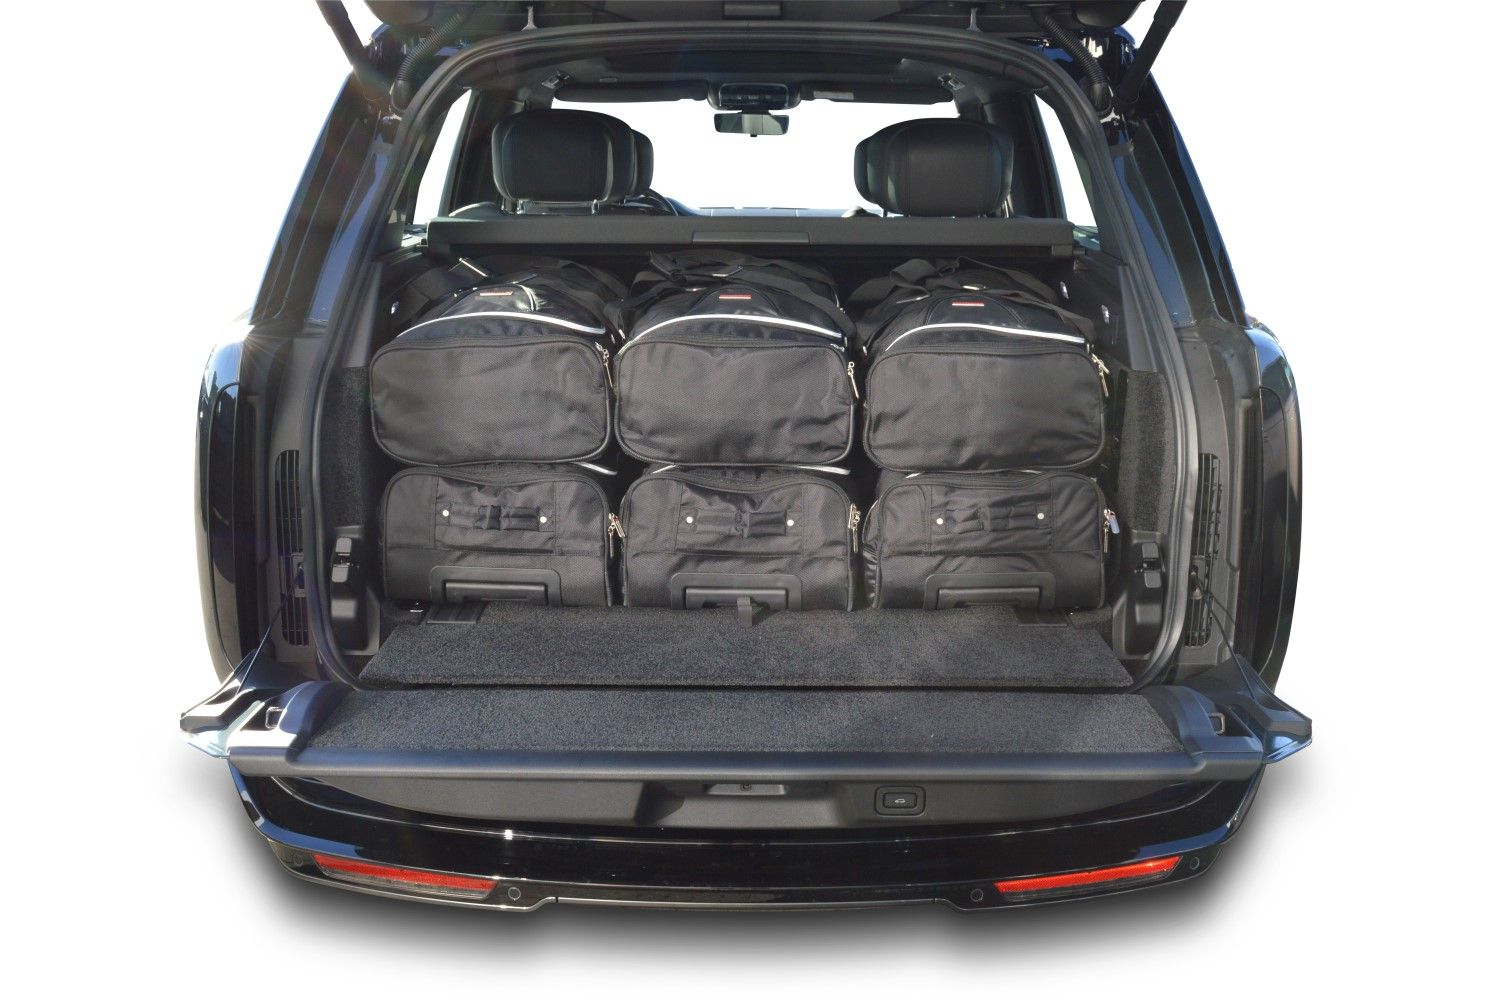 (L460) fit car (6 Land pcs) | for Travel for bags 379 $ Covers Range saving Perfect tailor Bags space Shop Car | Rover Rover Time V made | covers fits and